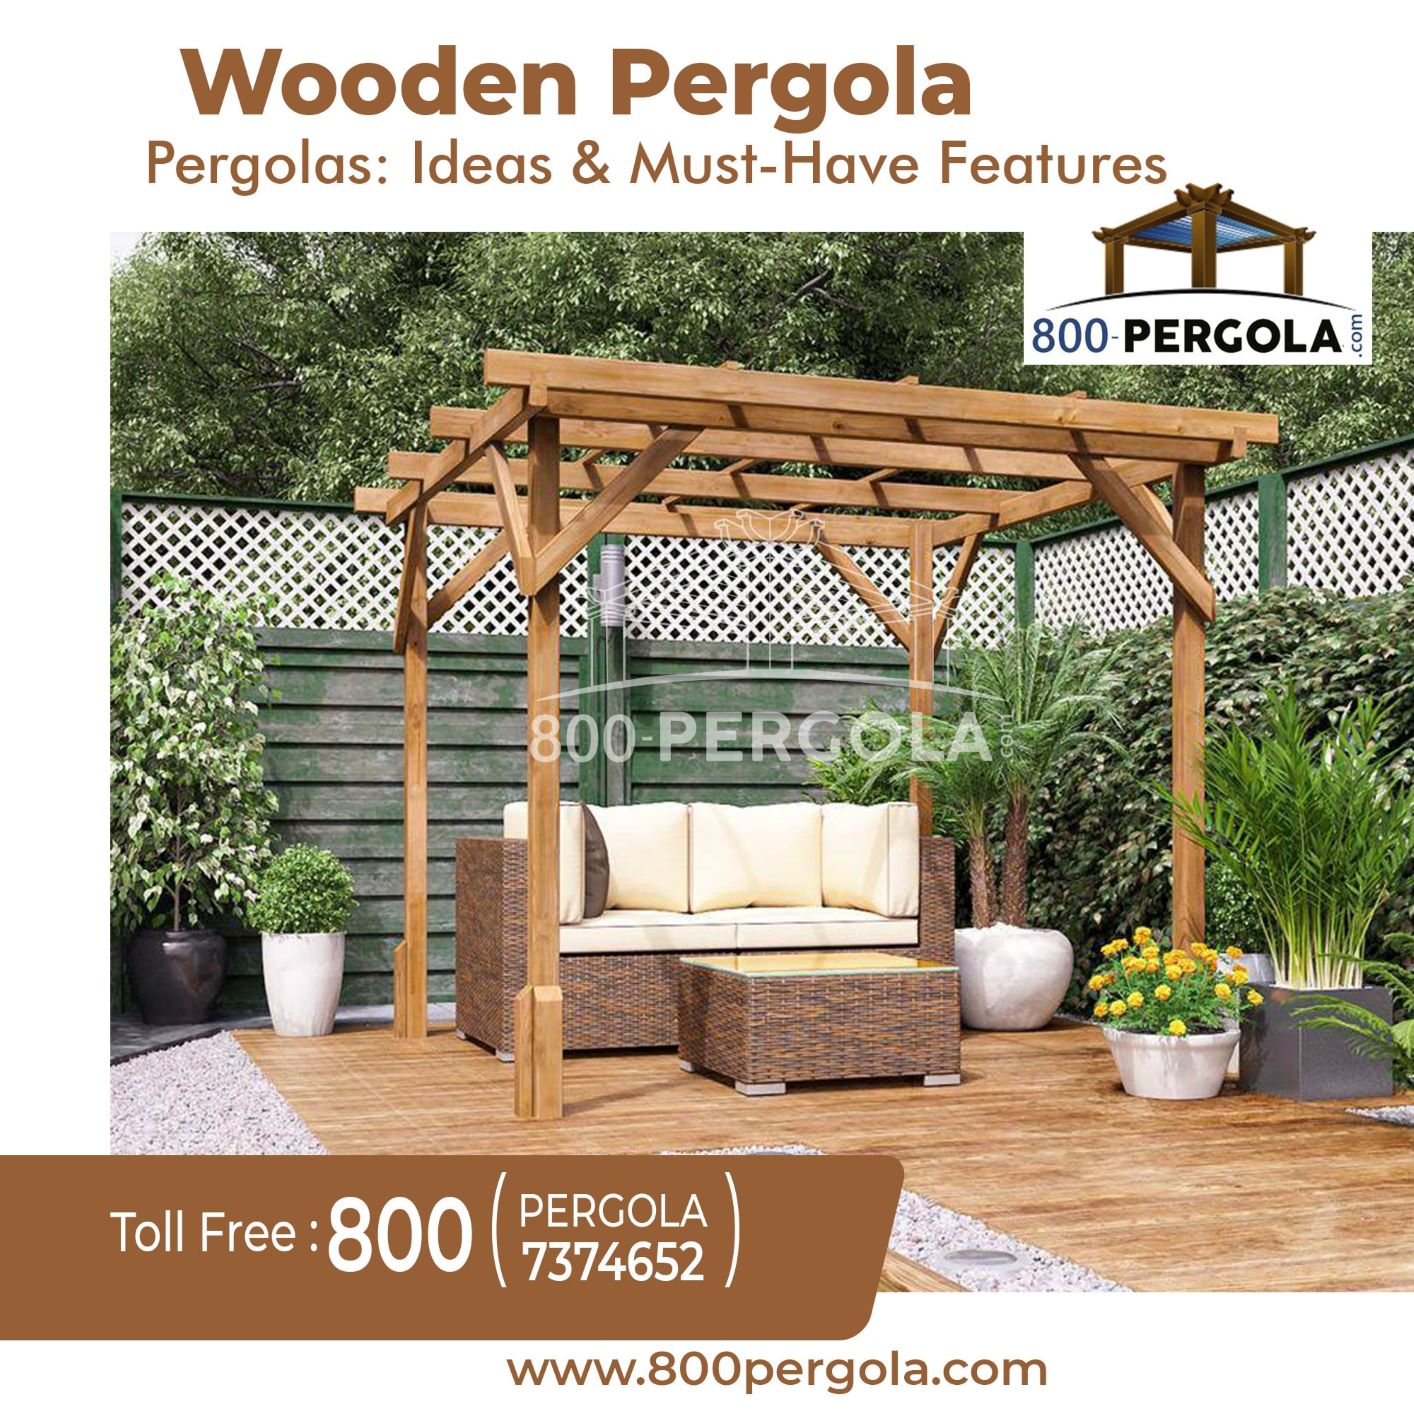 Wooden Pergolas Ideas and Must-Have Features